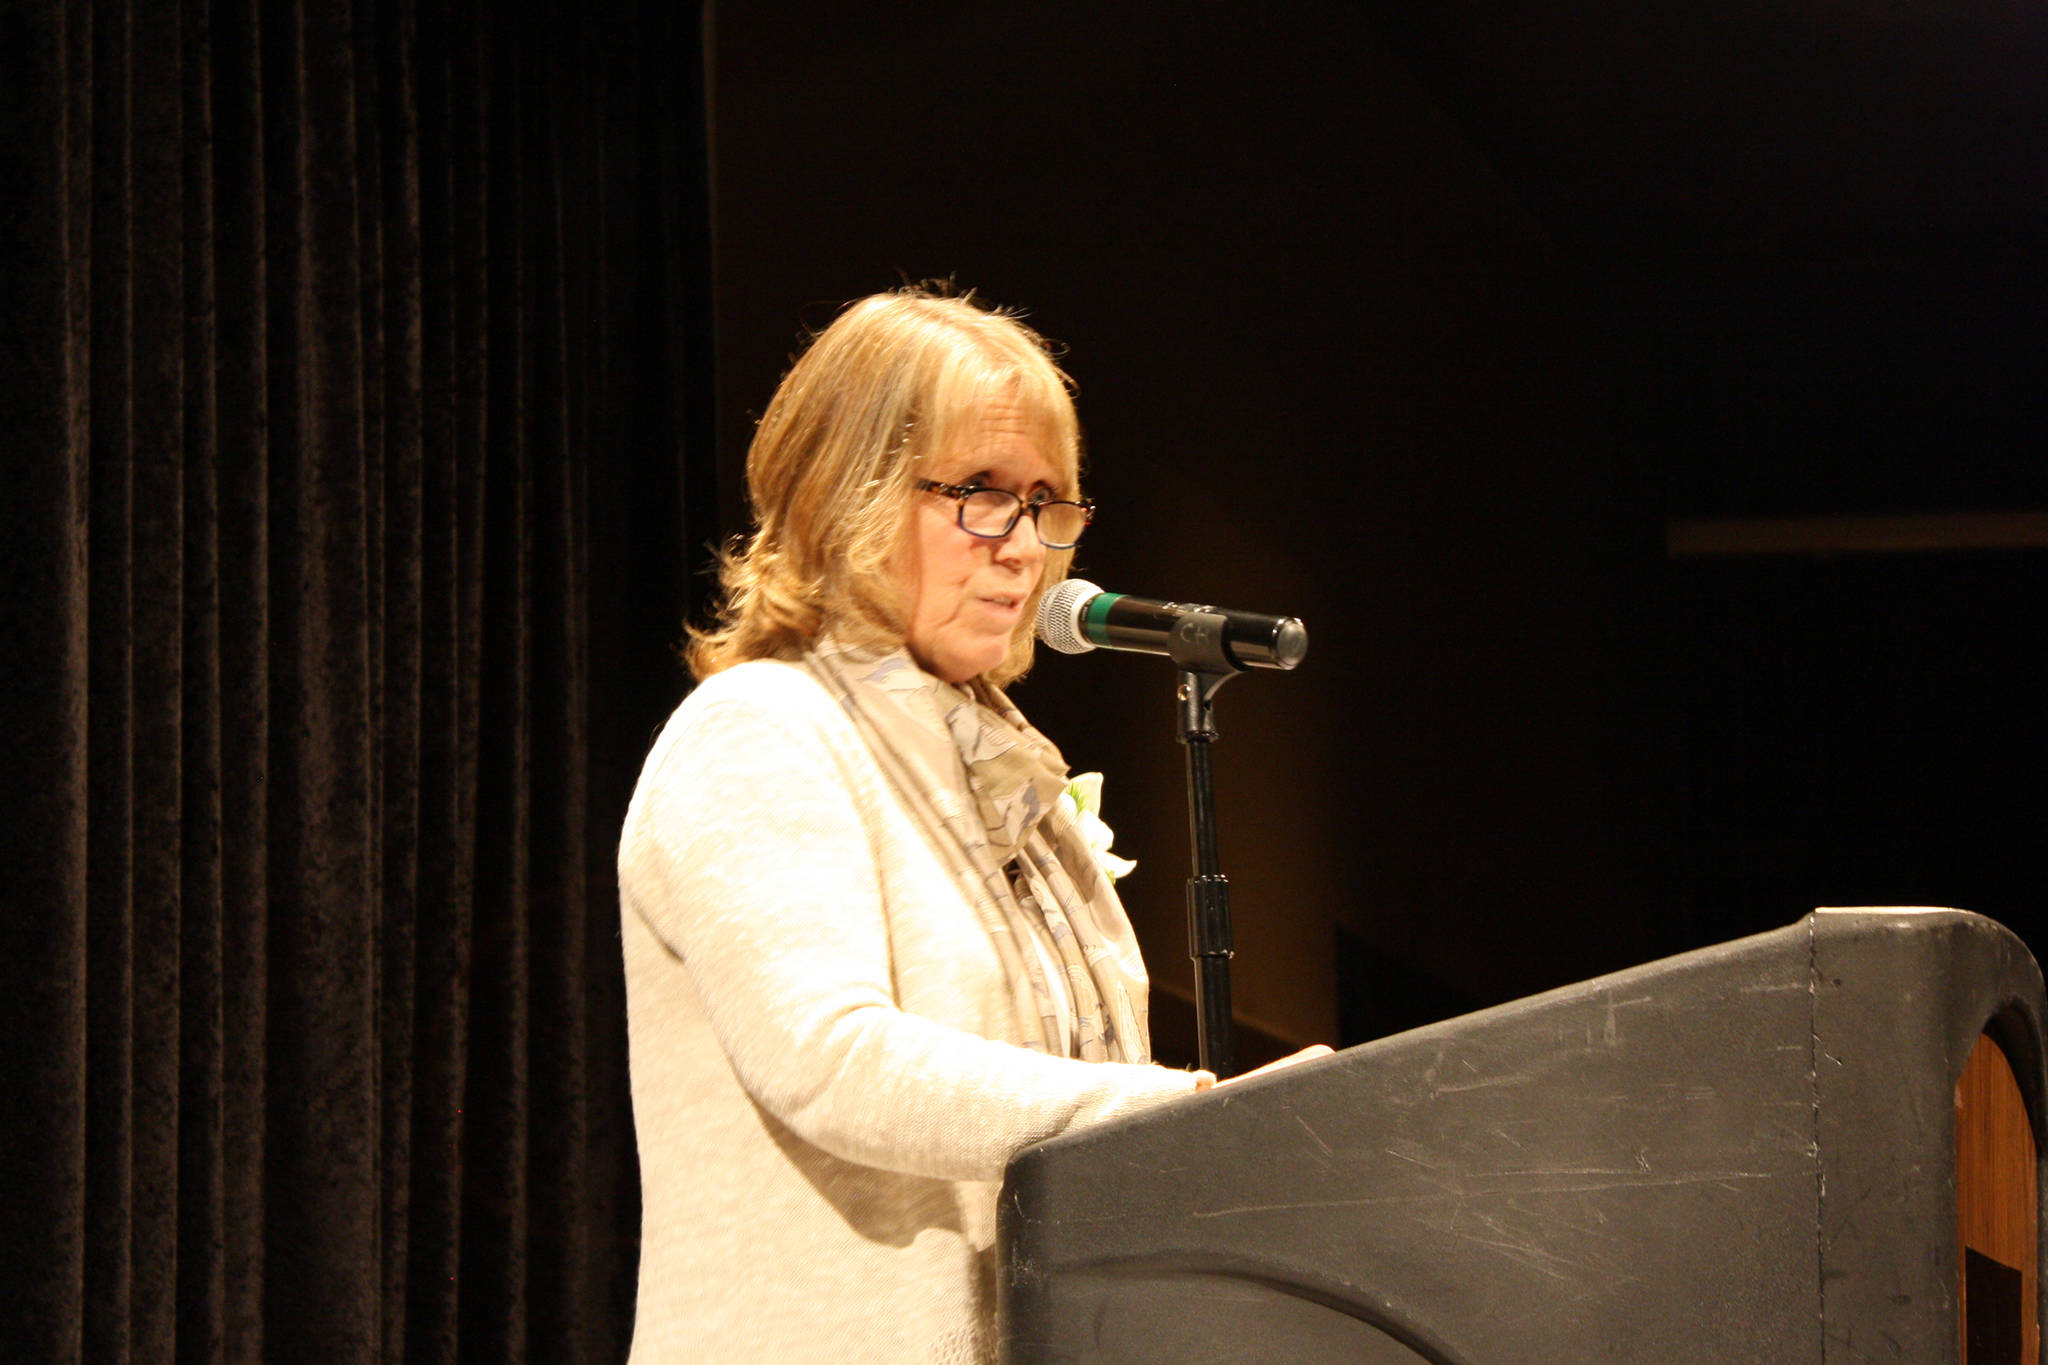 Janine Reep speaks during the Woman of Distinction 2019 Celebration Saturday, March 9, 2019 at Centennial Hall. During her speech she focused on the reality that the circumstances of one’s birth has a drastic impact on their life and the honor of being a “Woman of Disruption.” (Ben Hohenstatt | Capital City Weekly)